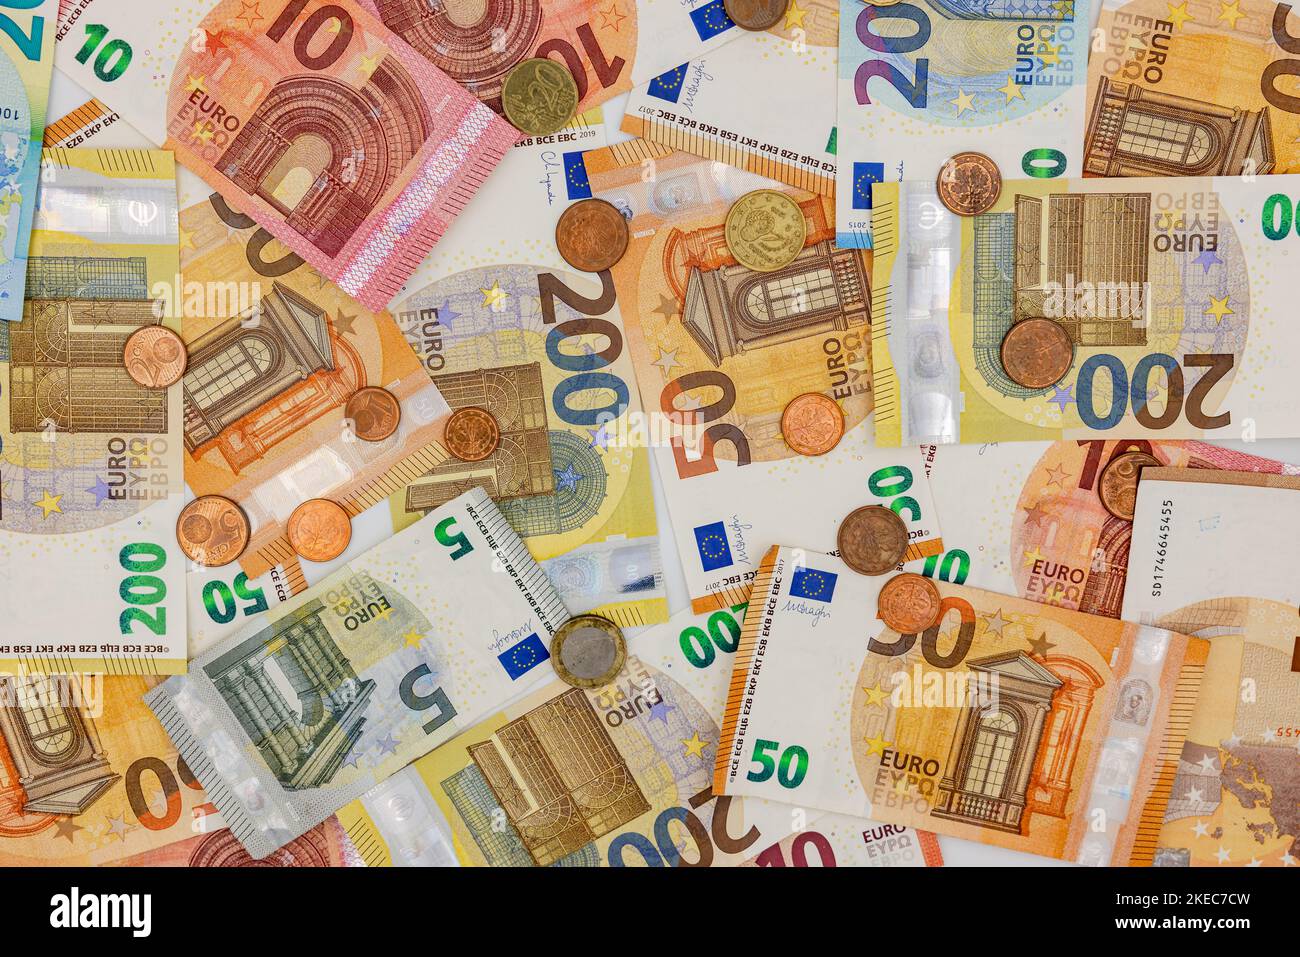 Format-filling background with a lot of colorful money from different euro banknotes and coins Stock Photo